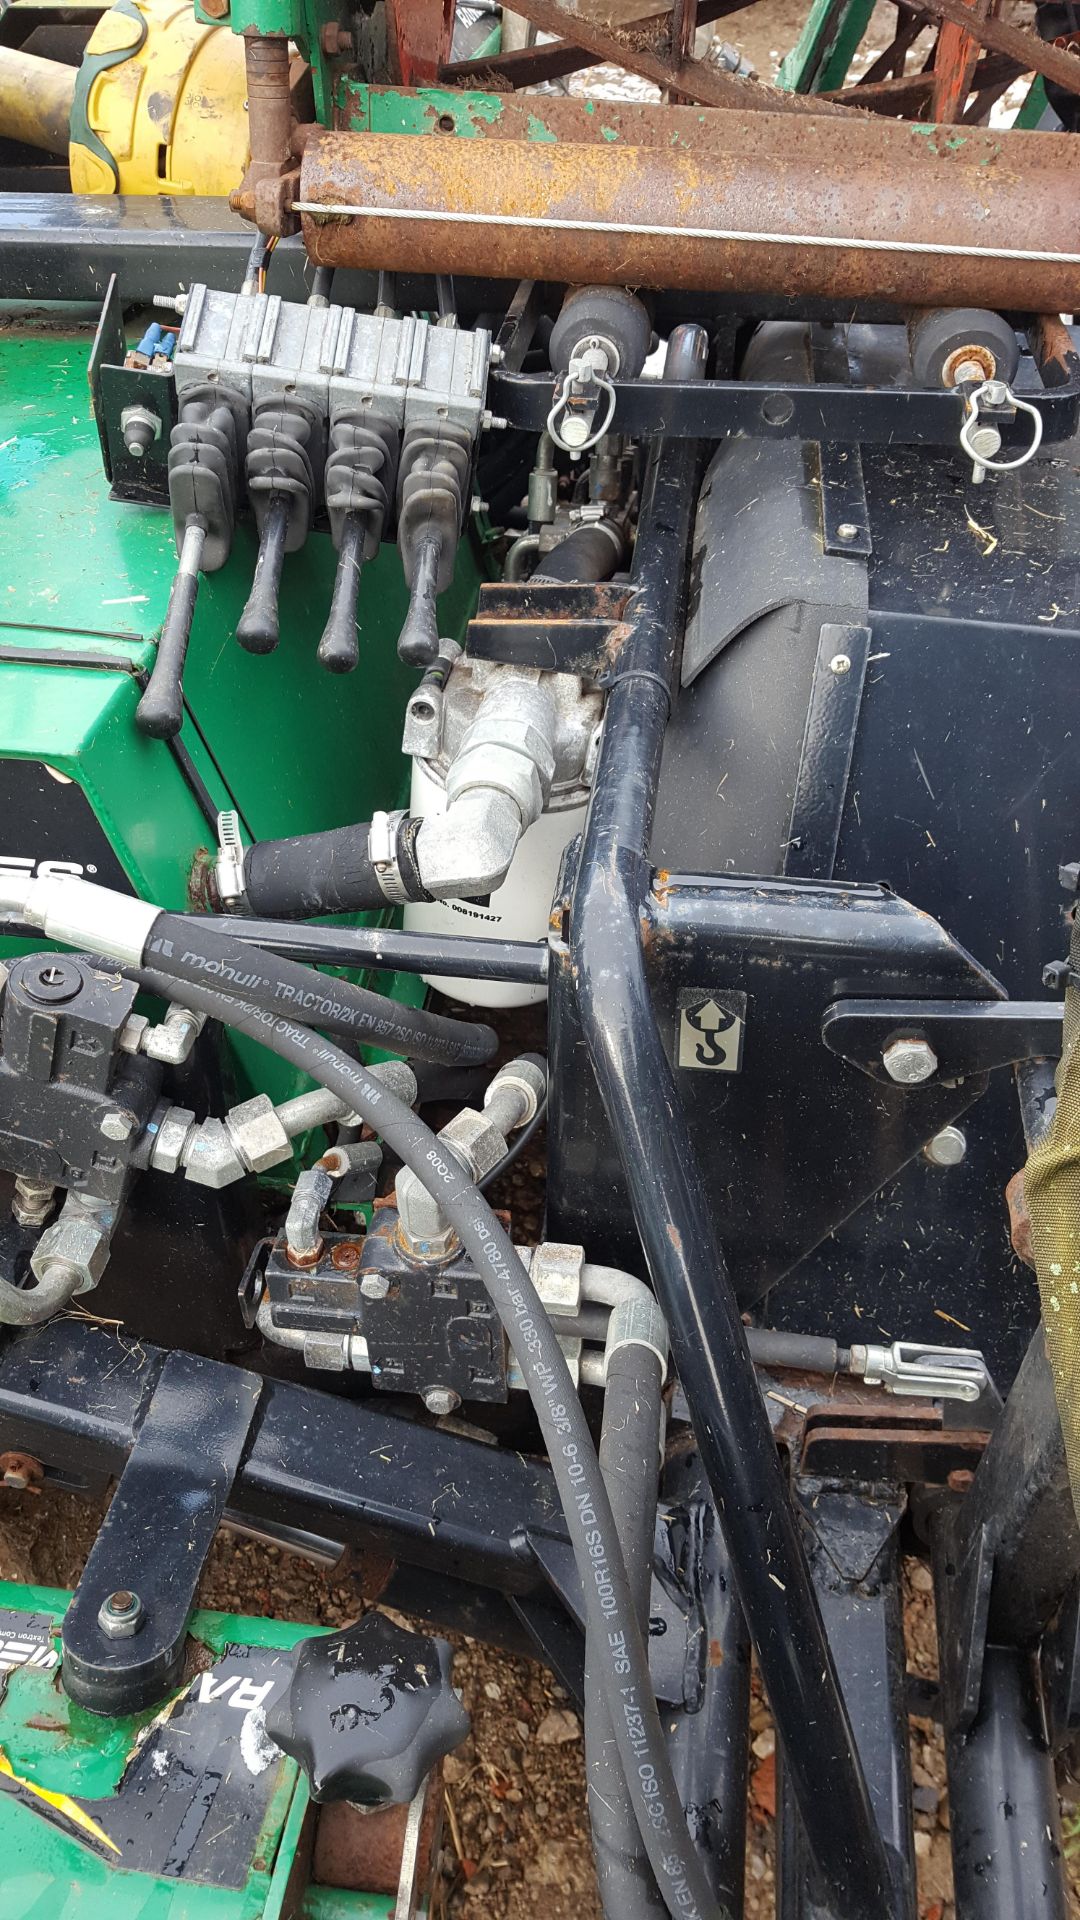 APPROX 2010 RANSOMES TG4650 7 GANG MOWER *PLUS VAT* - Image 3 of 5